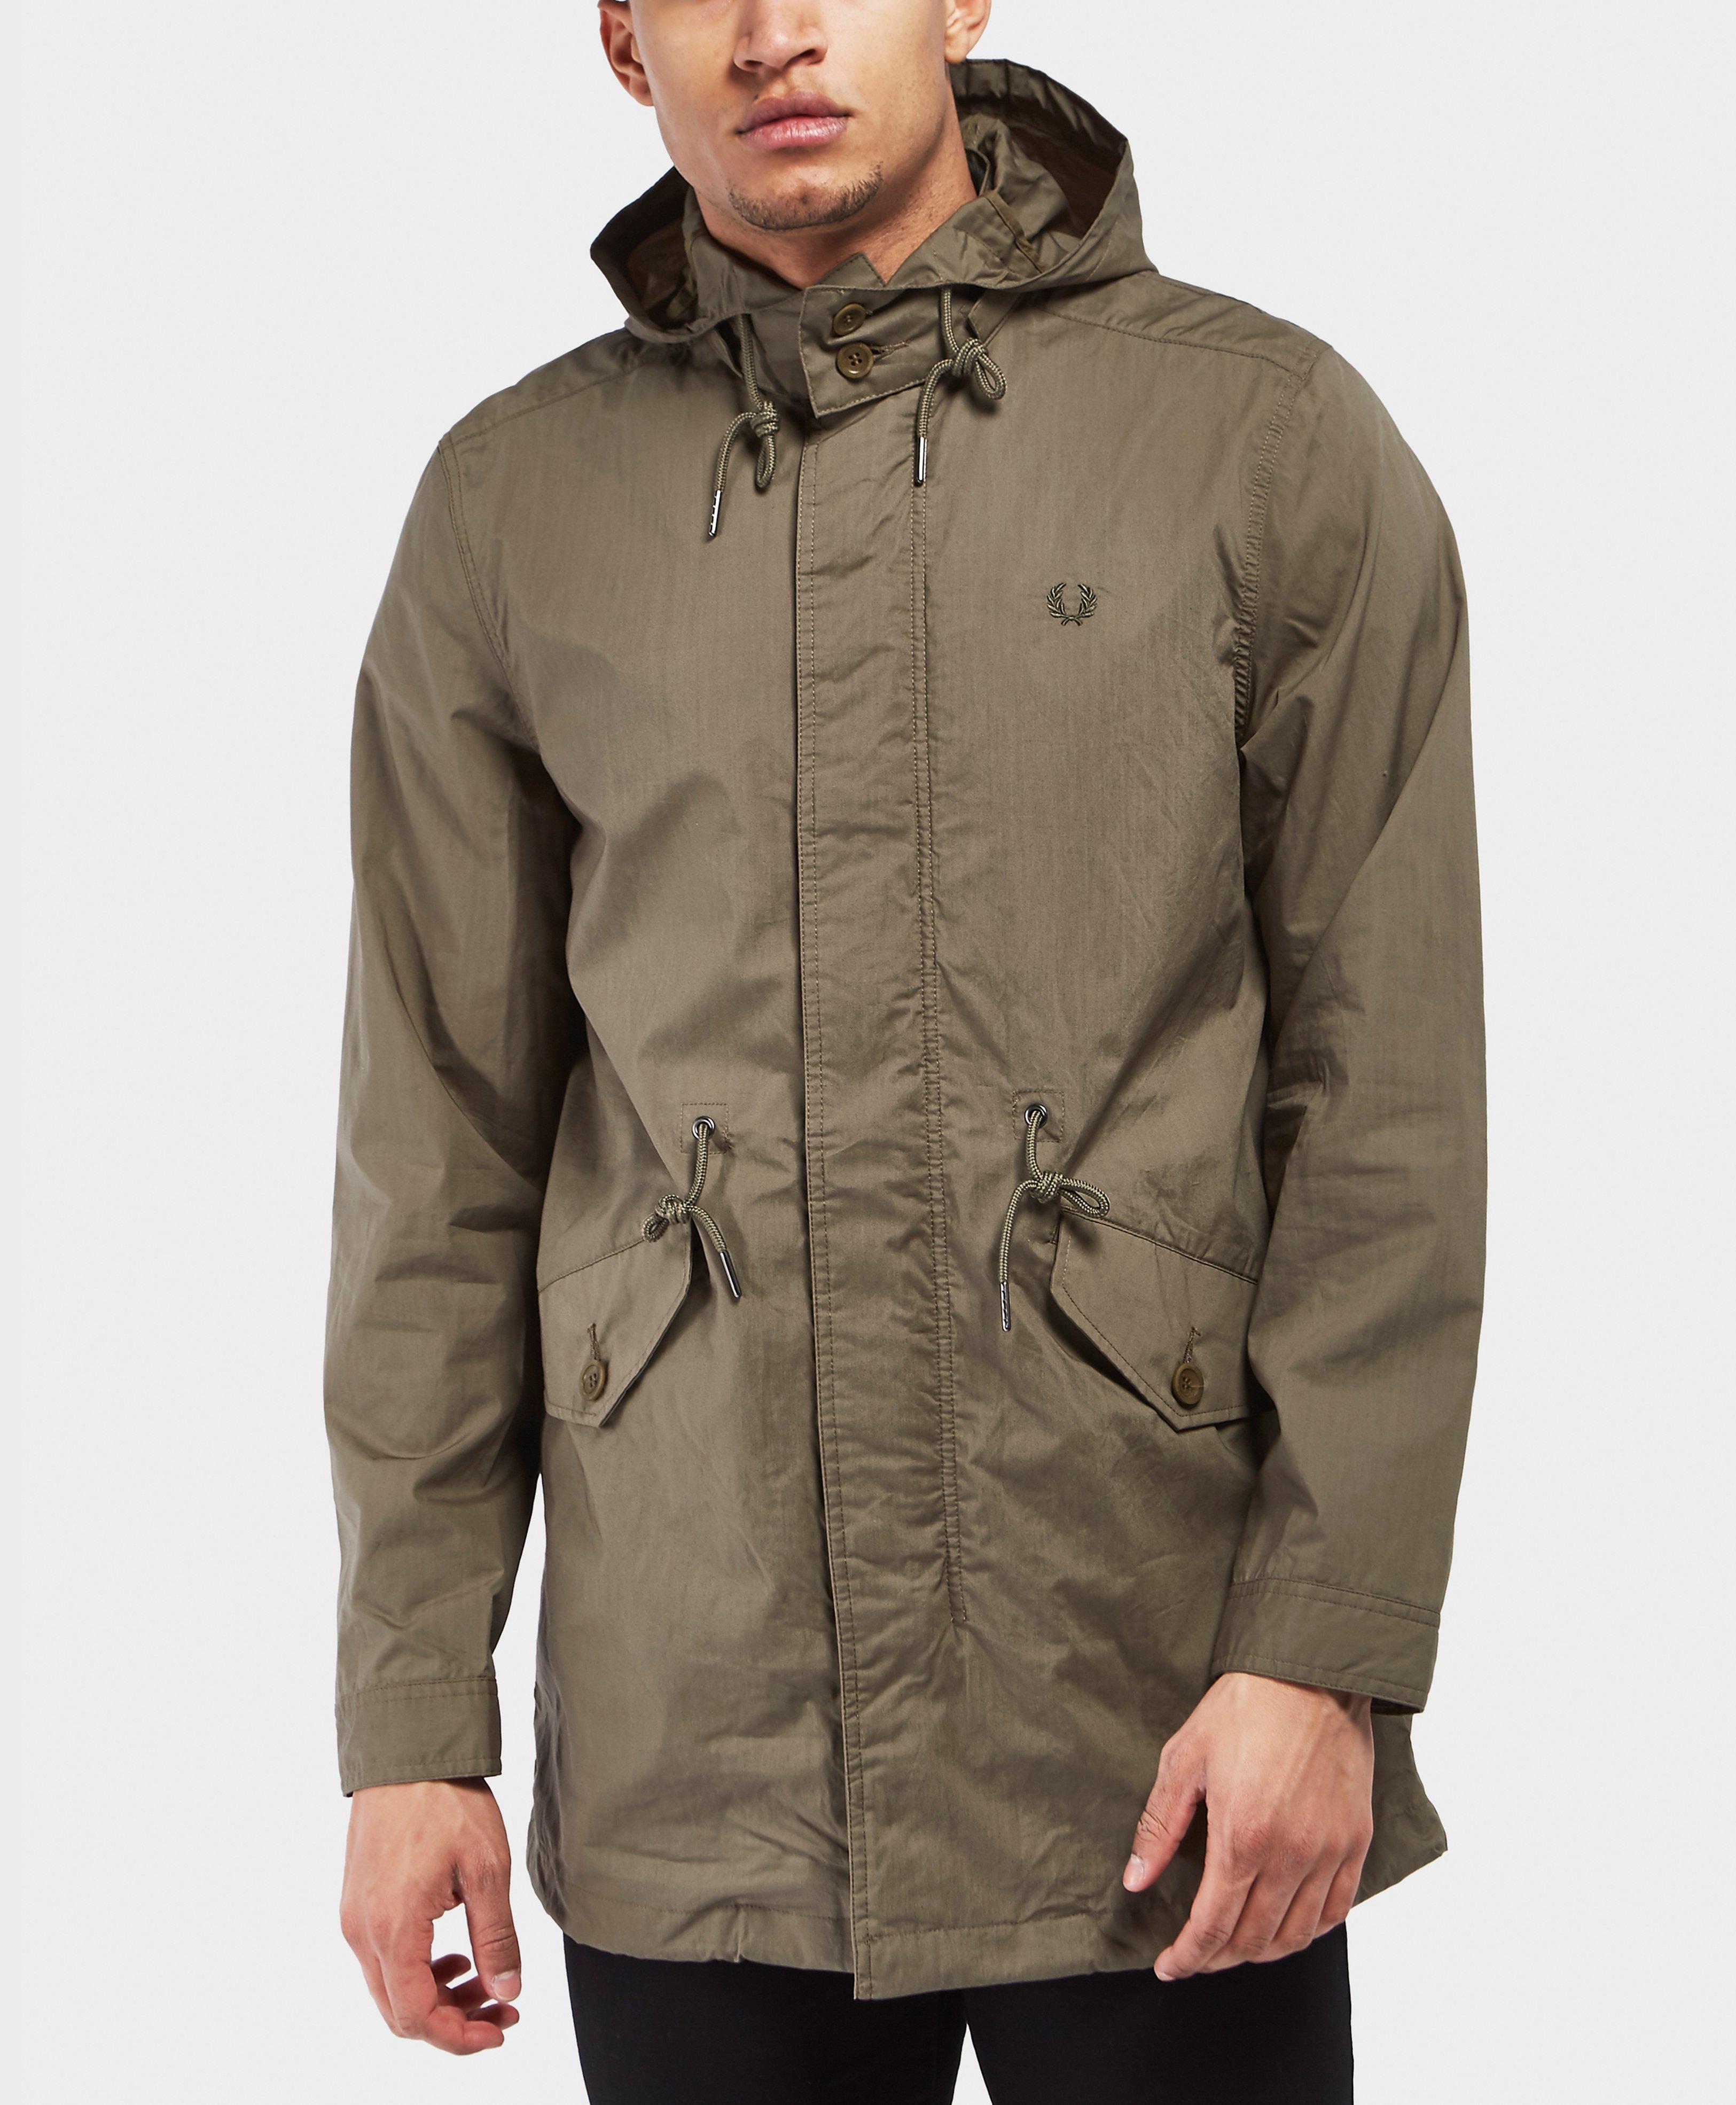 fred perry parka coat,therugbycatalog.com